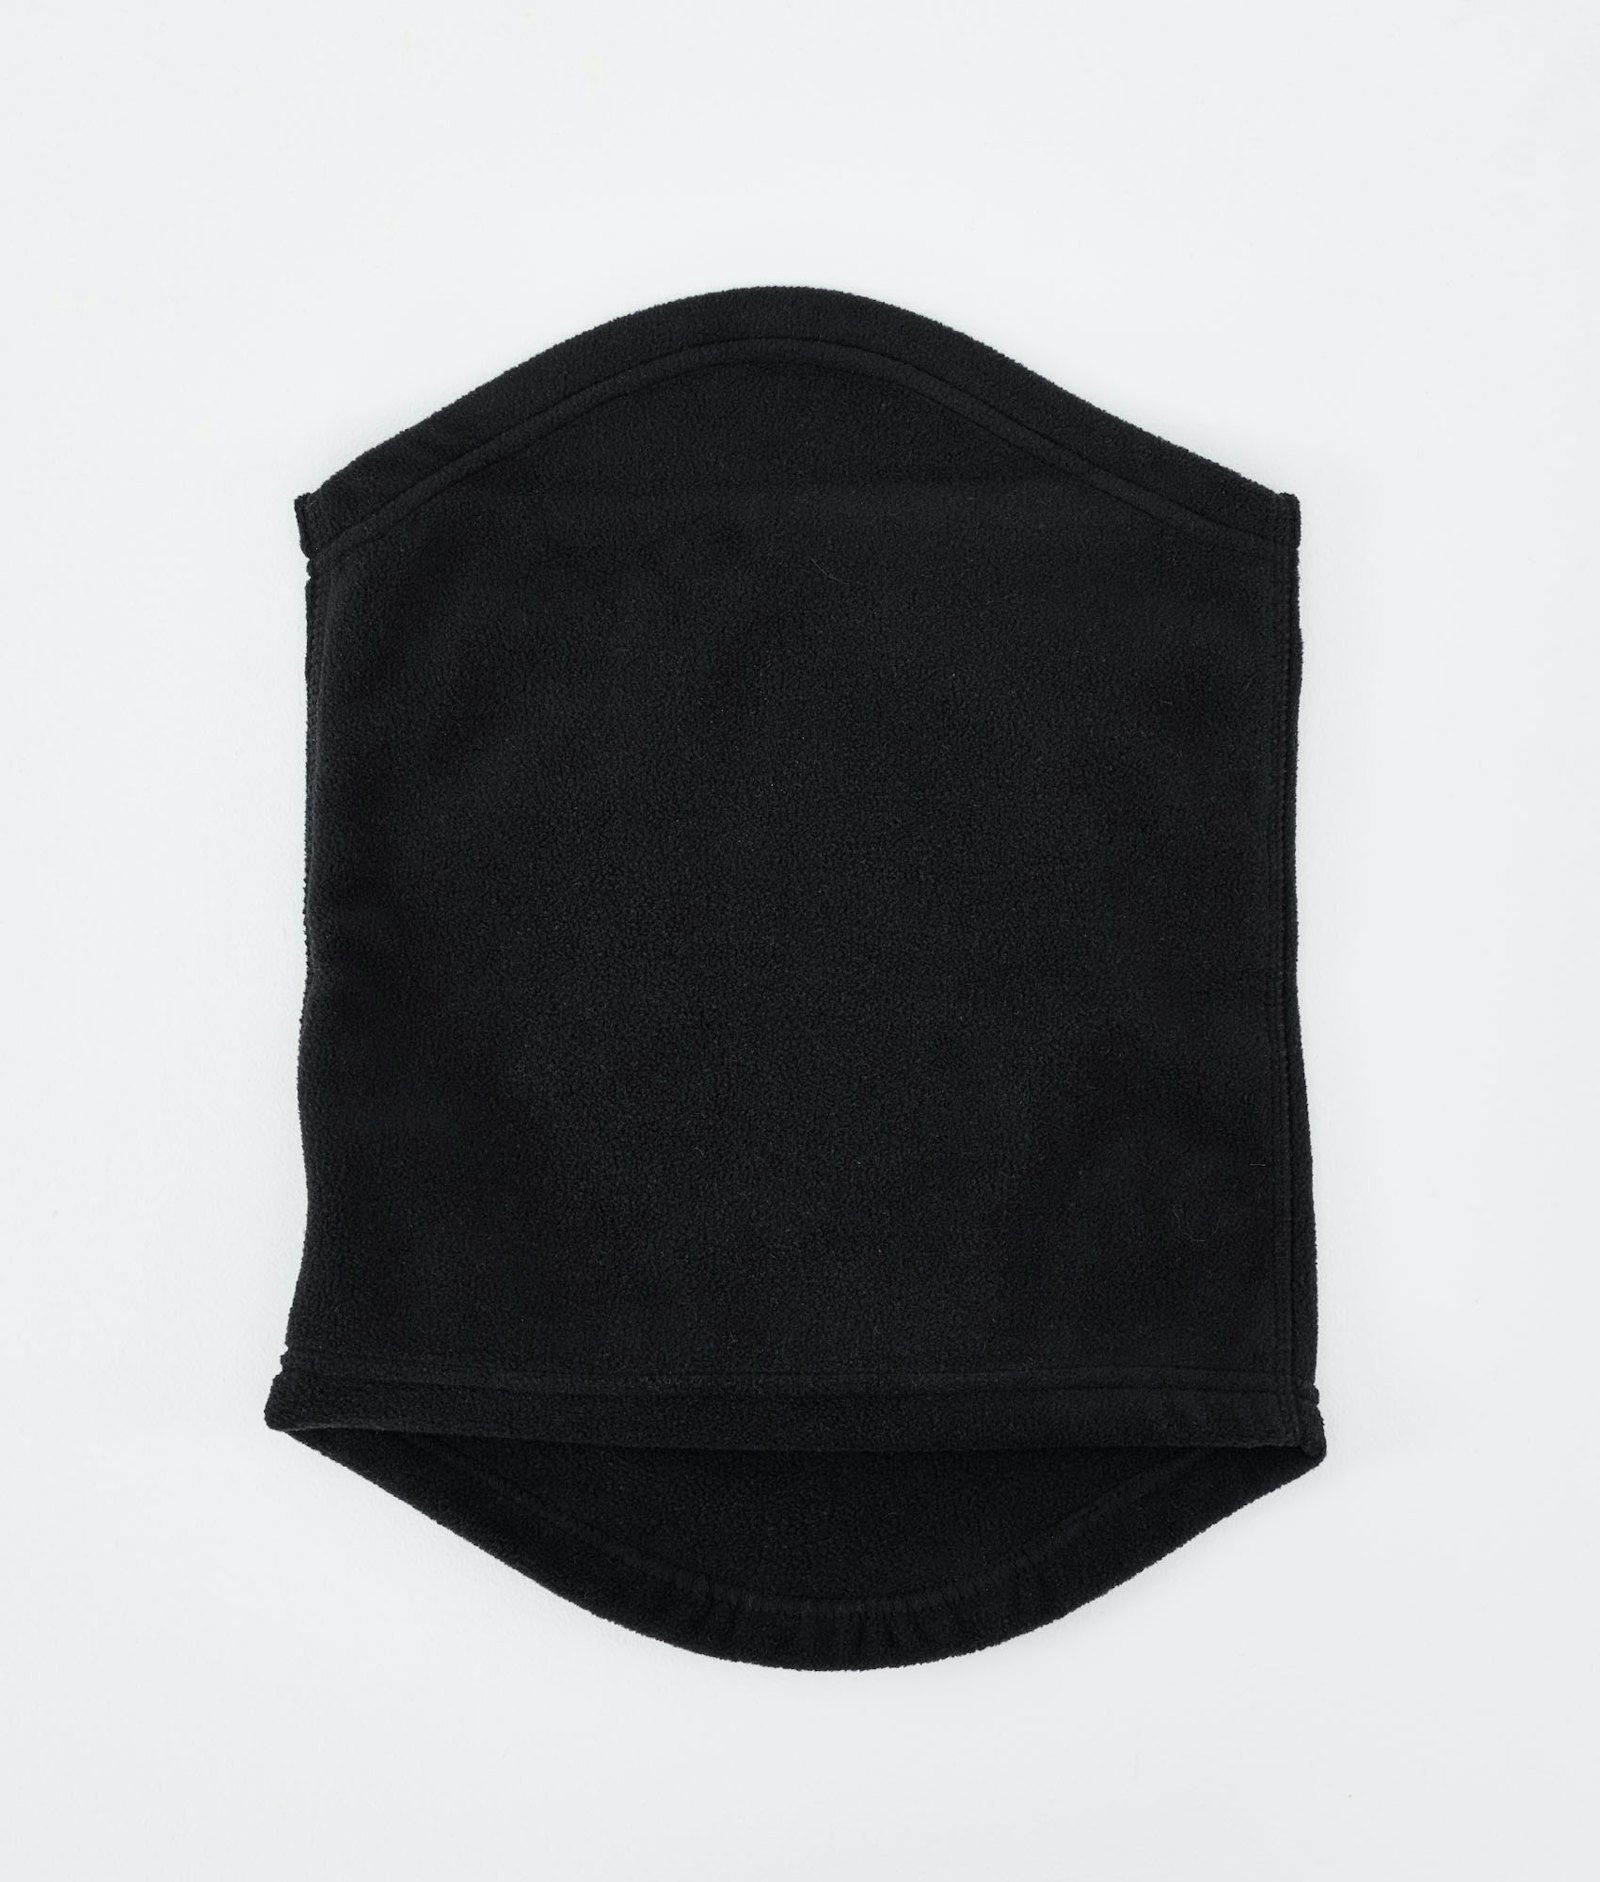 Dope Cozy Tube Facemask Black, Image 2 of 6